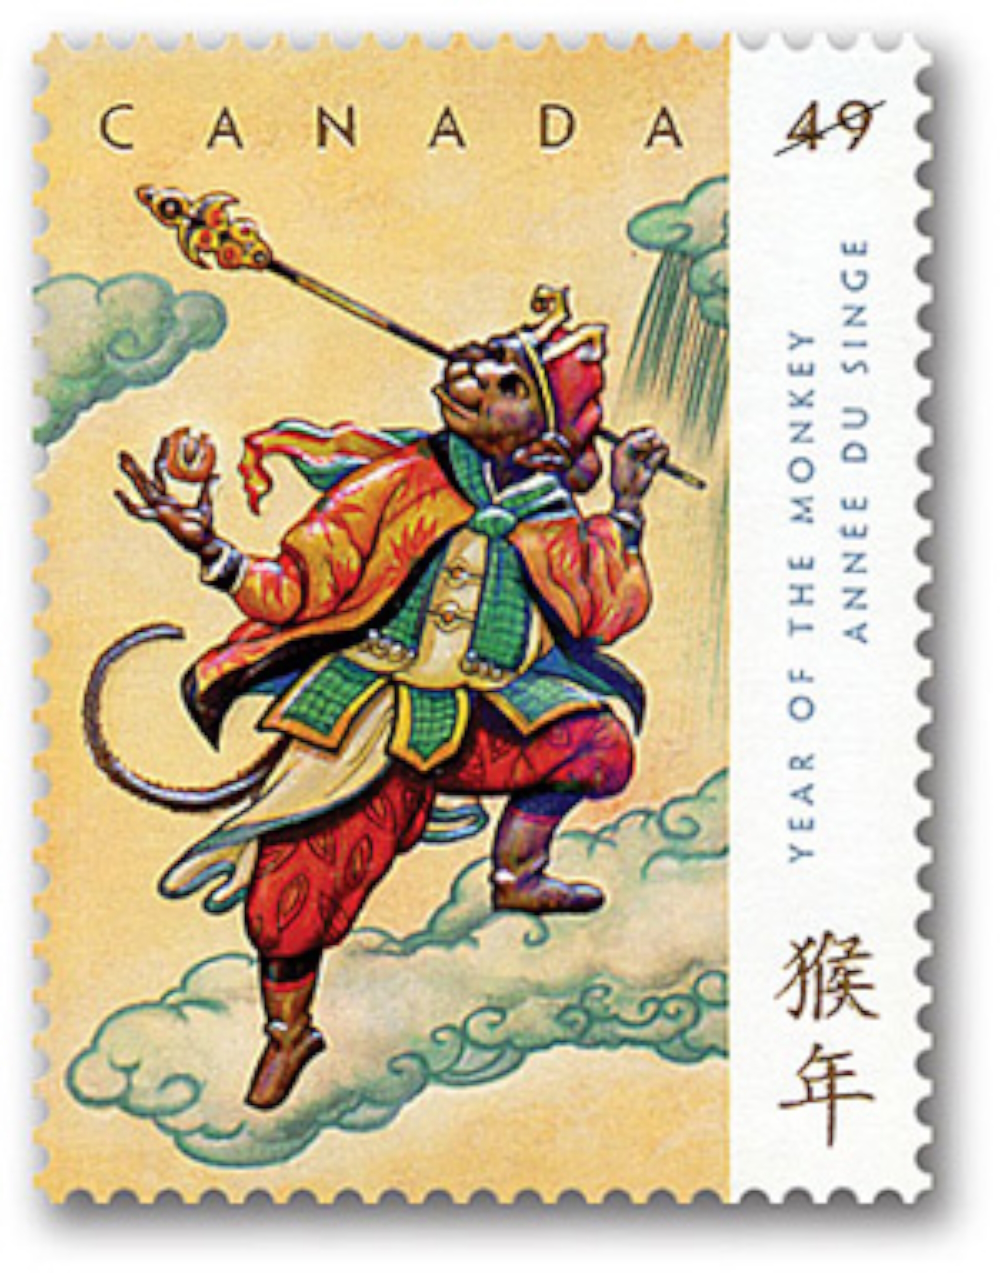 First stamp for Canada's Post in 2004, 'Year of the Monkey'.